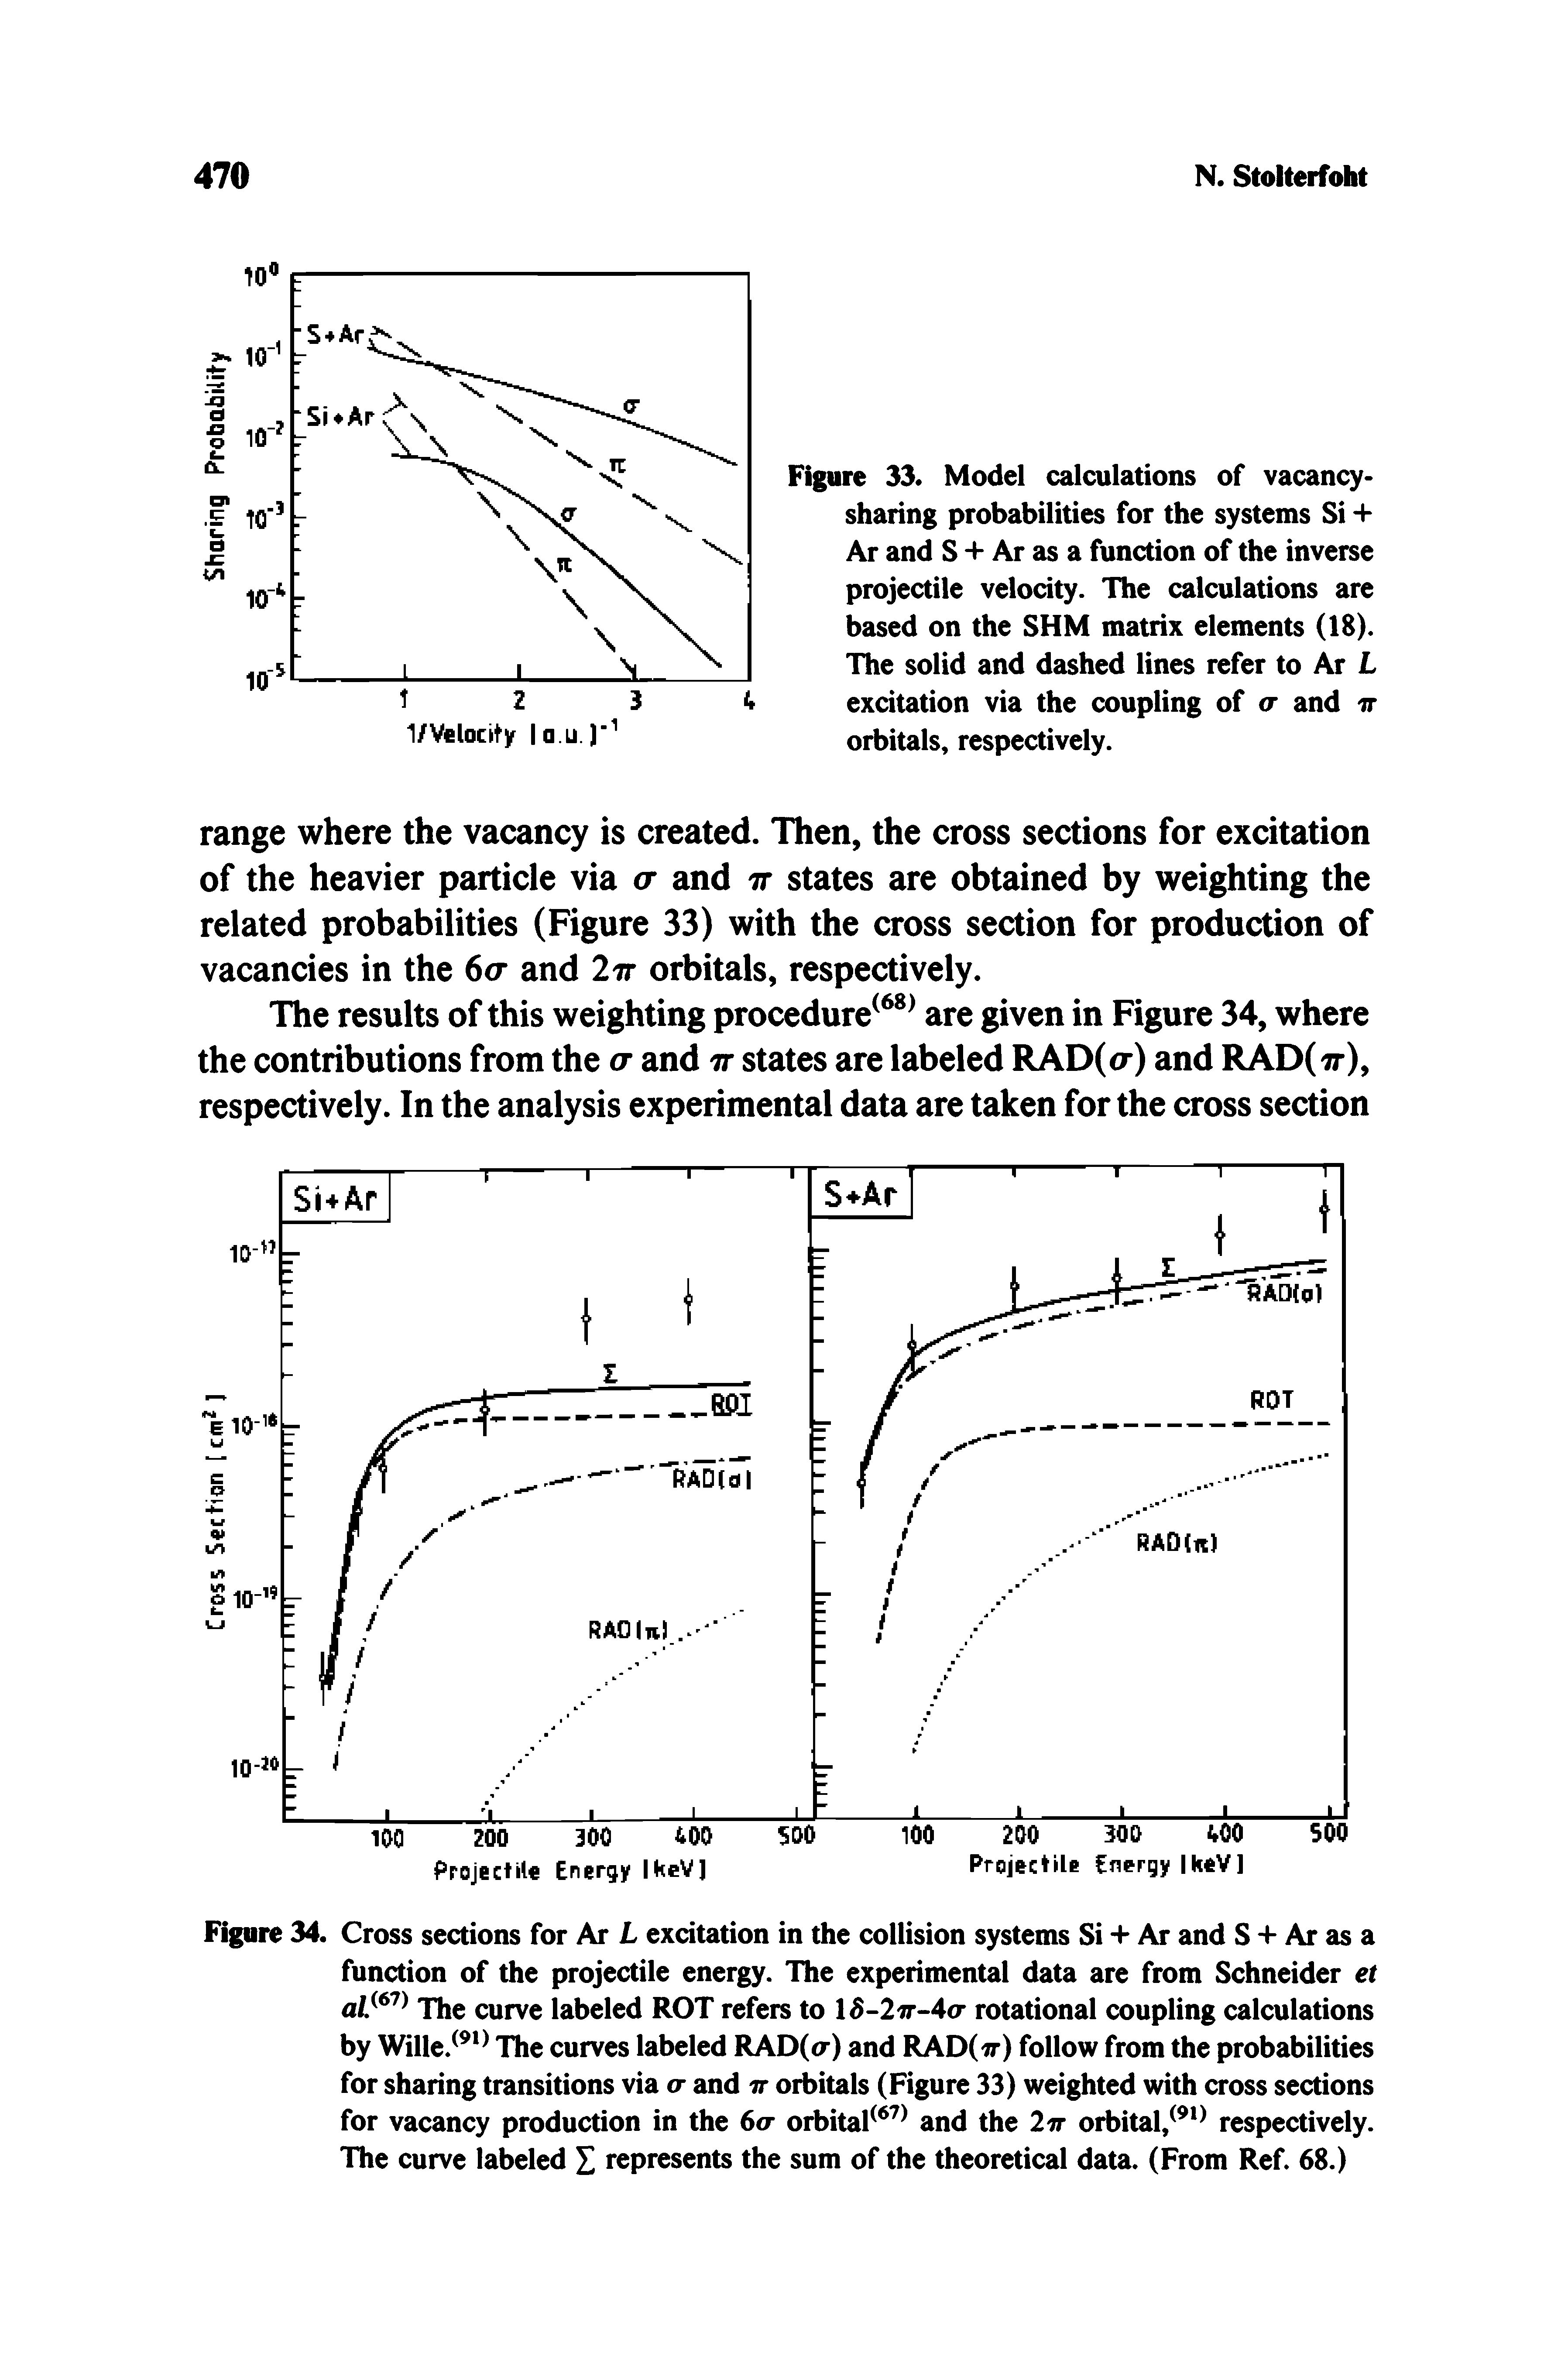 Figure 34. Cross sections for Ar L excitation in the collision systems Si -t- Ar and S + Ar as a function of the projectile energy. The experimental data are from Schneider el The curve labeled ROT refers to 6-2v-A<r rotational coupling calculations by Wille. The curves labeled RAD(<r) and RAD(ir) follow from the probabilities for sharing transitions via a and w orbitals (Figure 33) weighted with cross sections for vacancy production in the 6o- orbital and the 2ir orbital, respectively. The curve labeled X represents the sum of the theoretical data. (From Ref. 68.)...